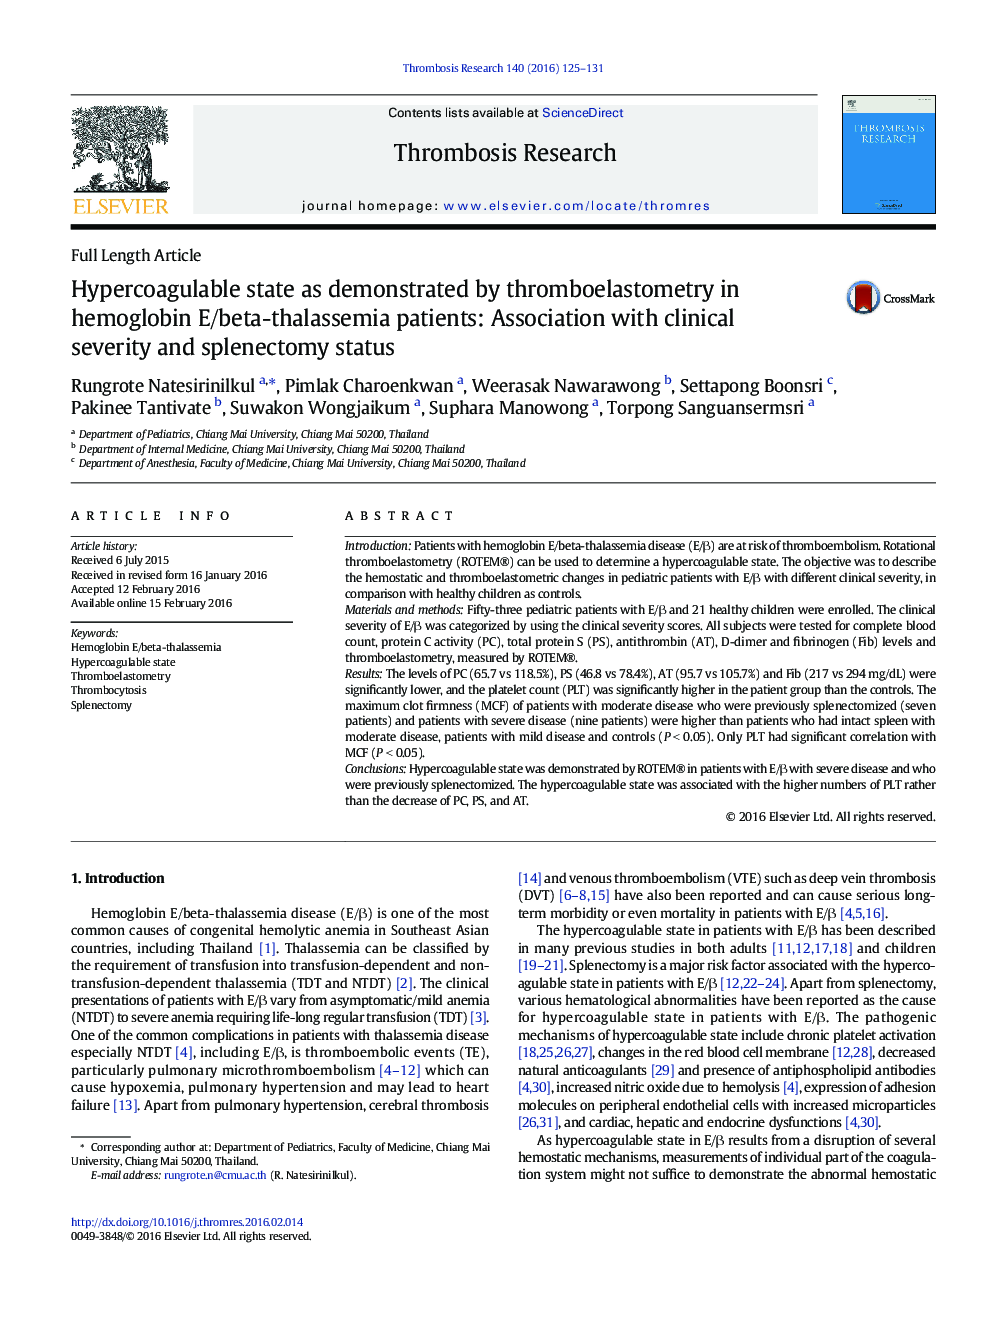 Hypercoagulable state as demonstrated by thromboelastometry in hemoglobin E/beta-thalassemia patients: Association with clinical severity and splenectomy status